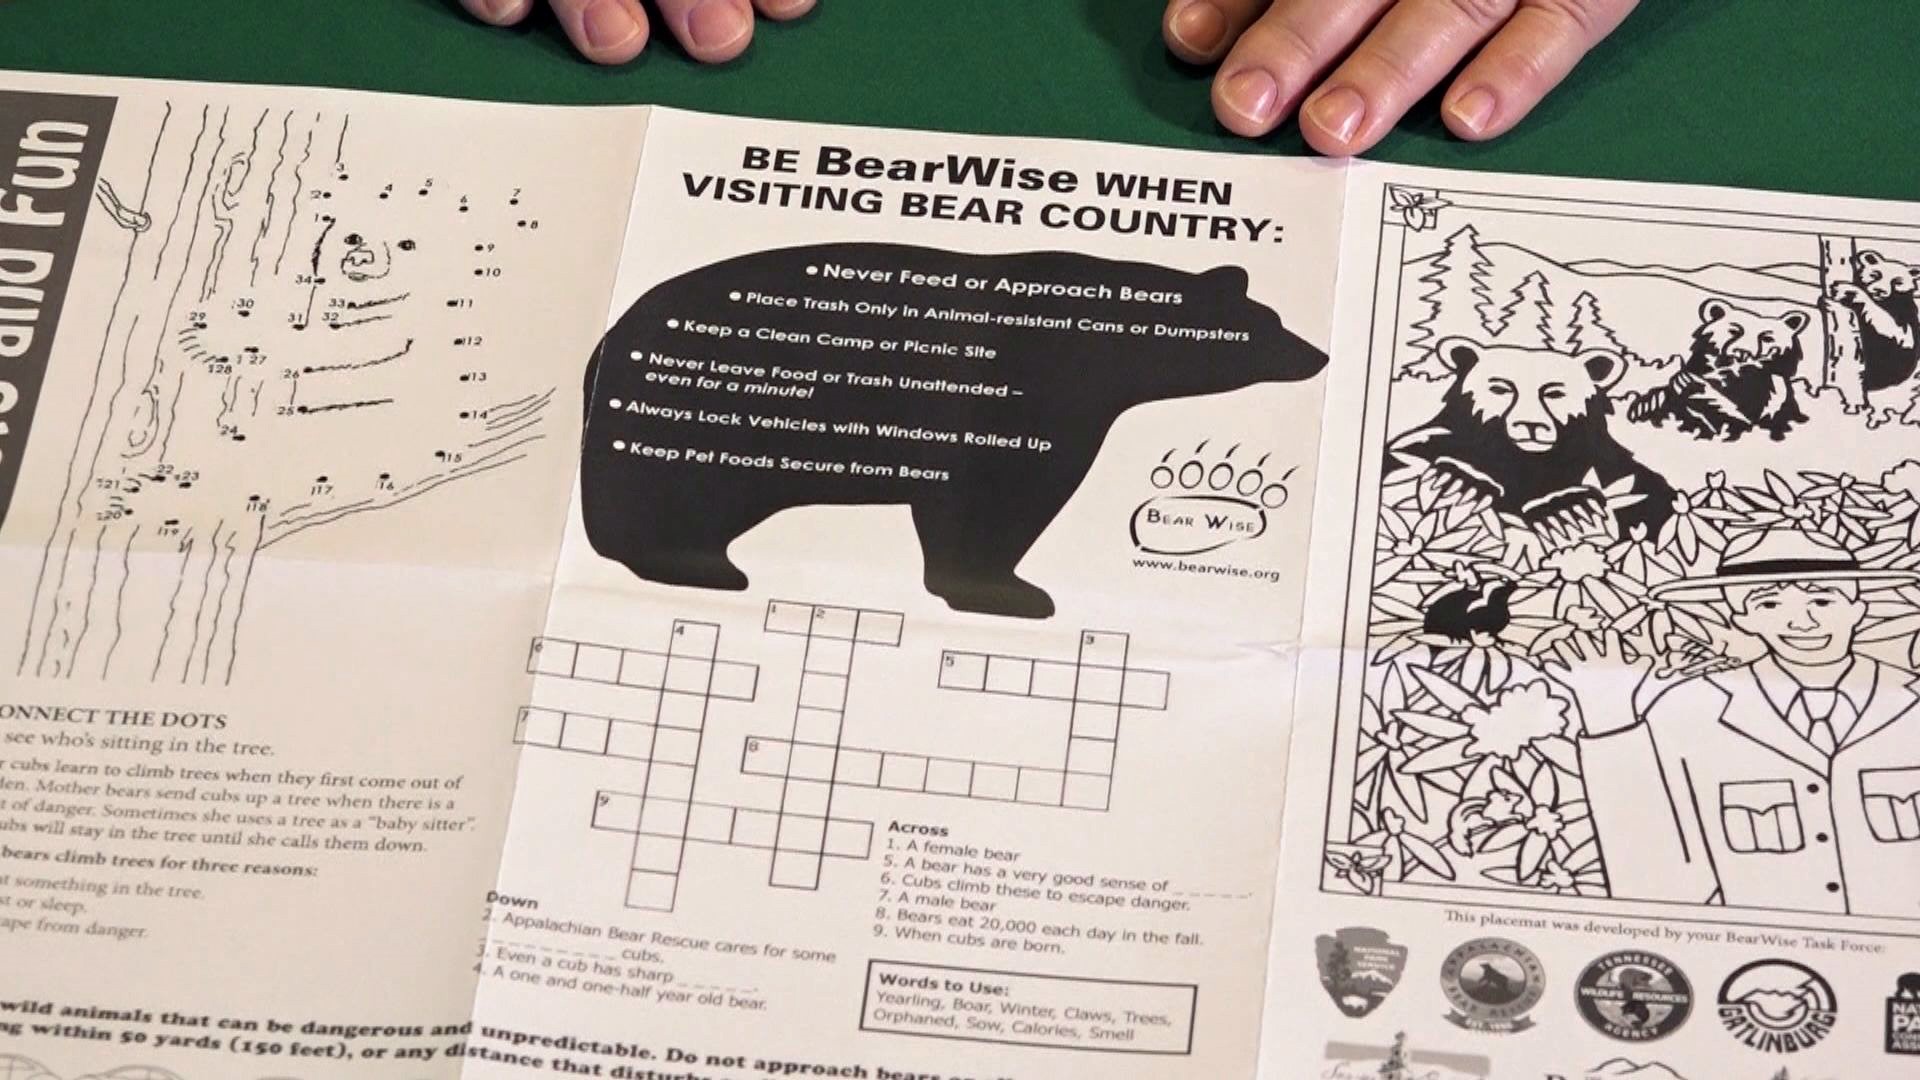 A new placemat is designed to teach tourists in the Smokies about bear safety while drawing at restaurant tables.